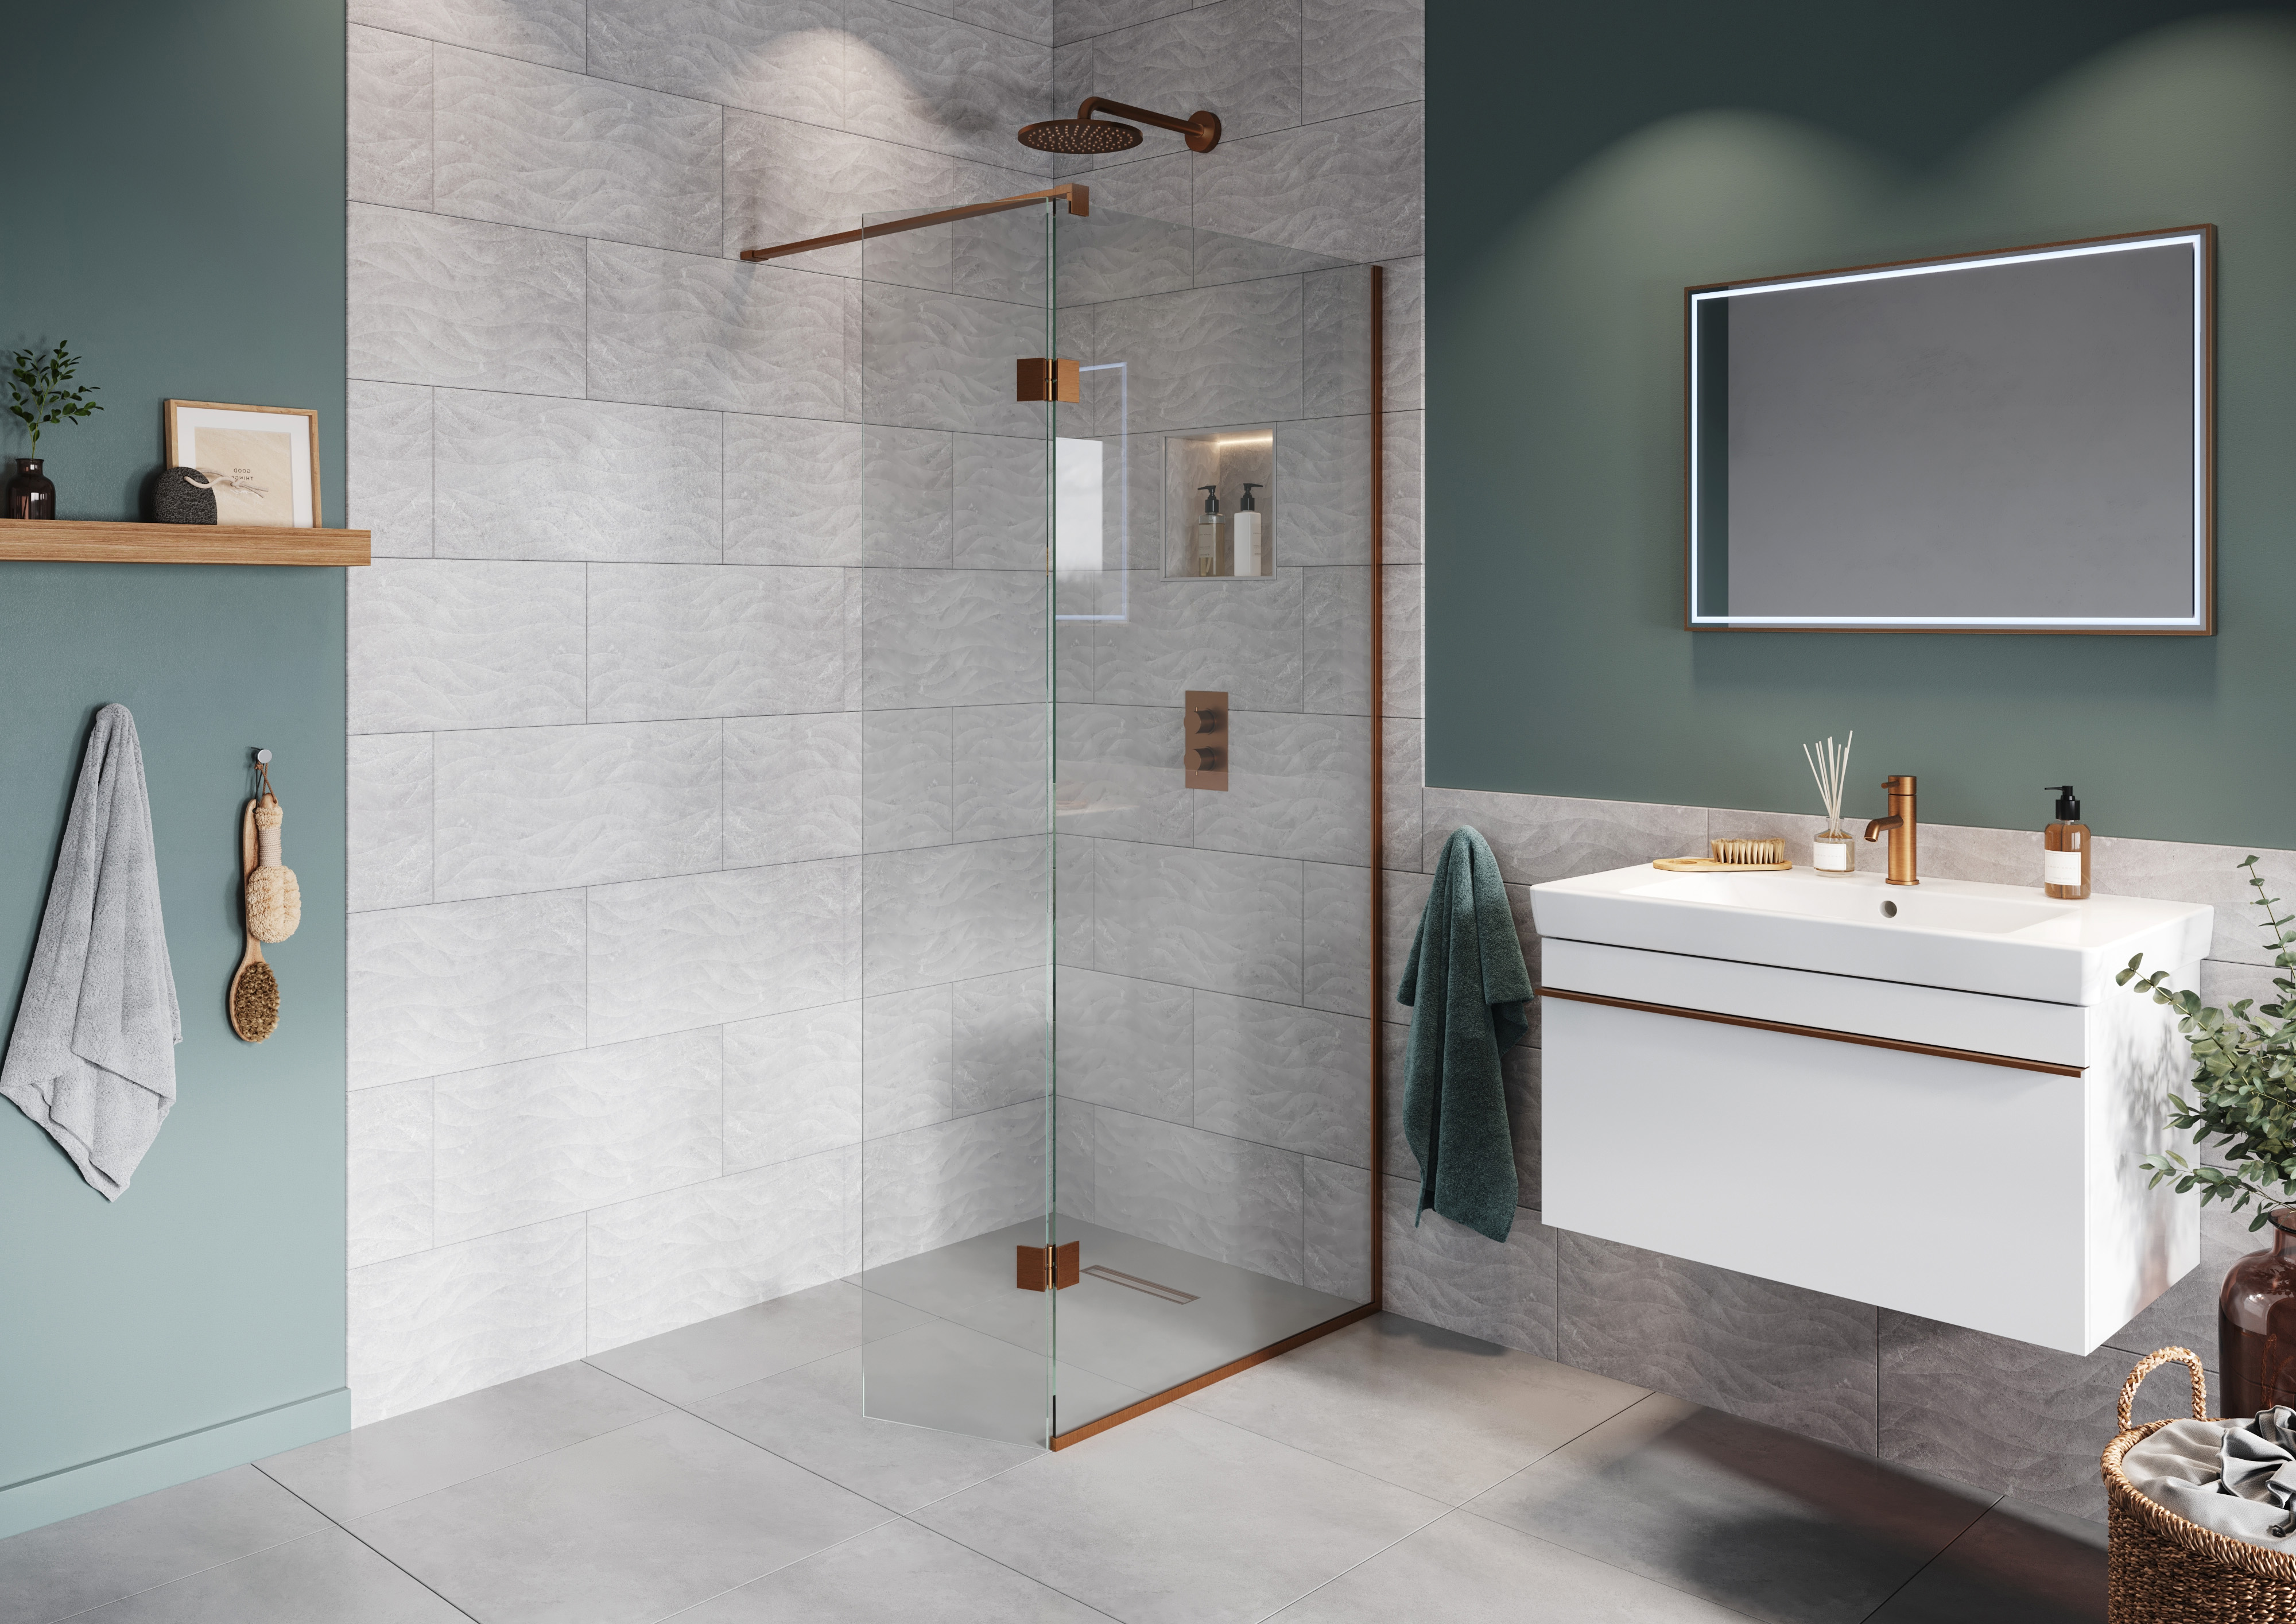 Hadleigh 8mm Brushed Bronze 900mm Frameless Wetroom Screen with Wall Arm & 350mm Pivot Panel